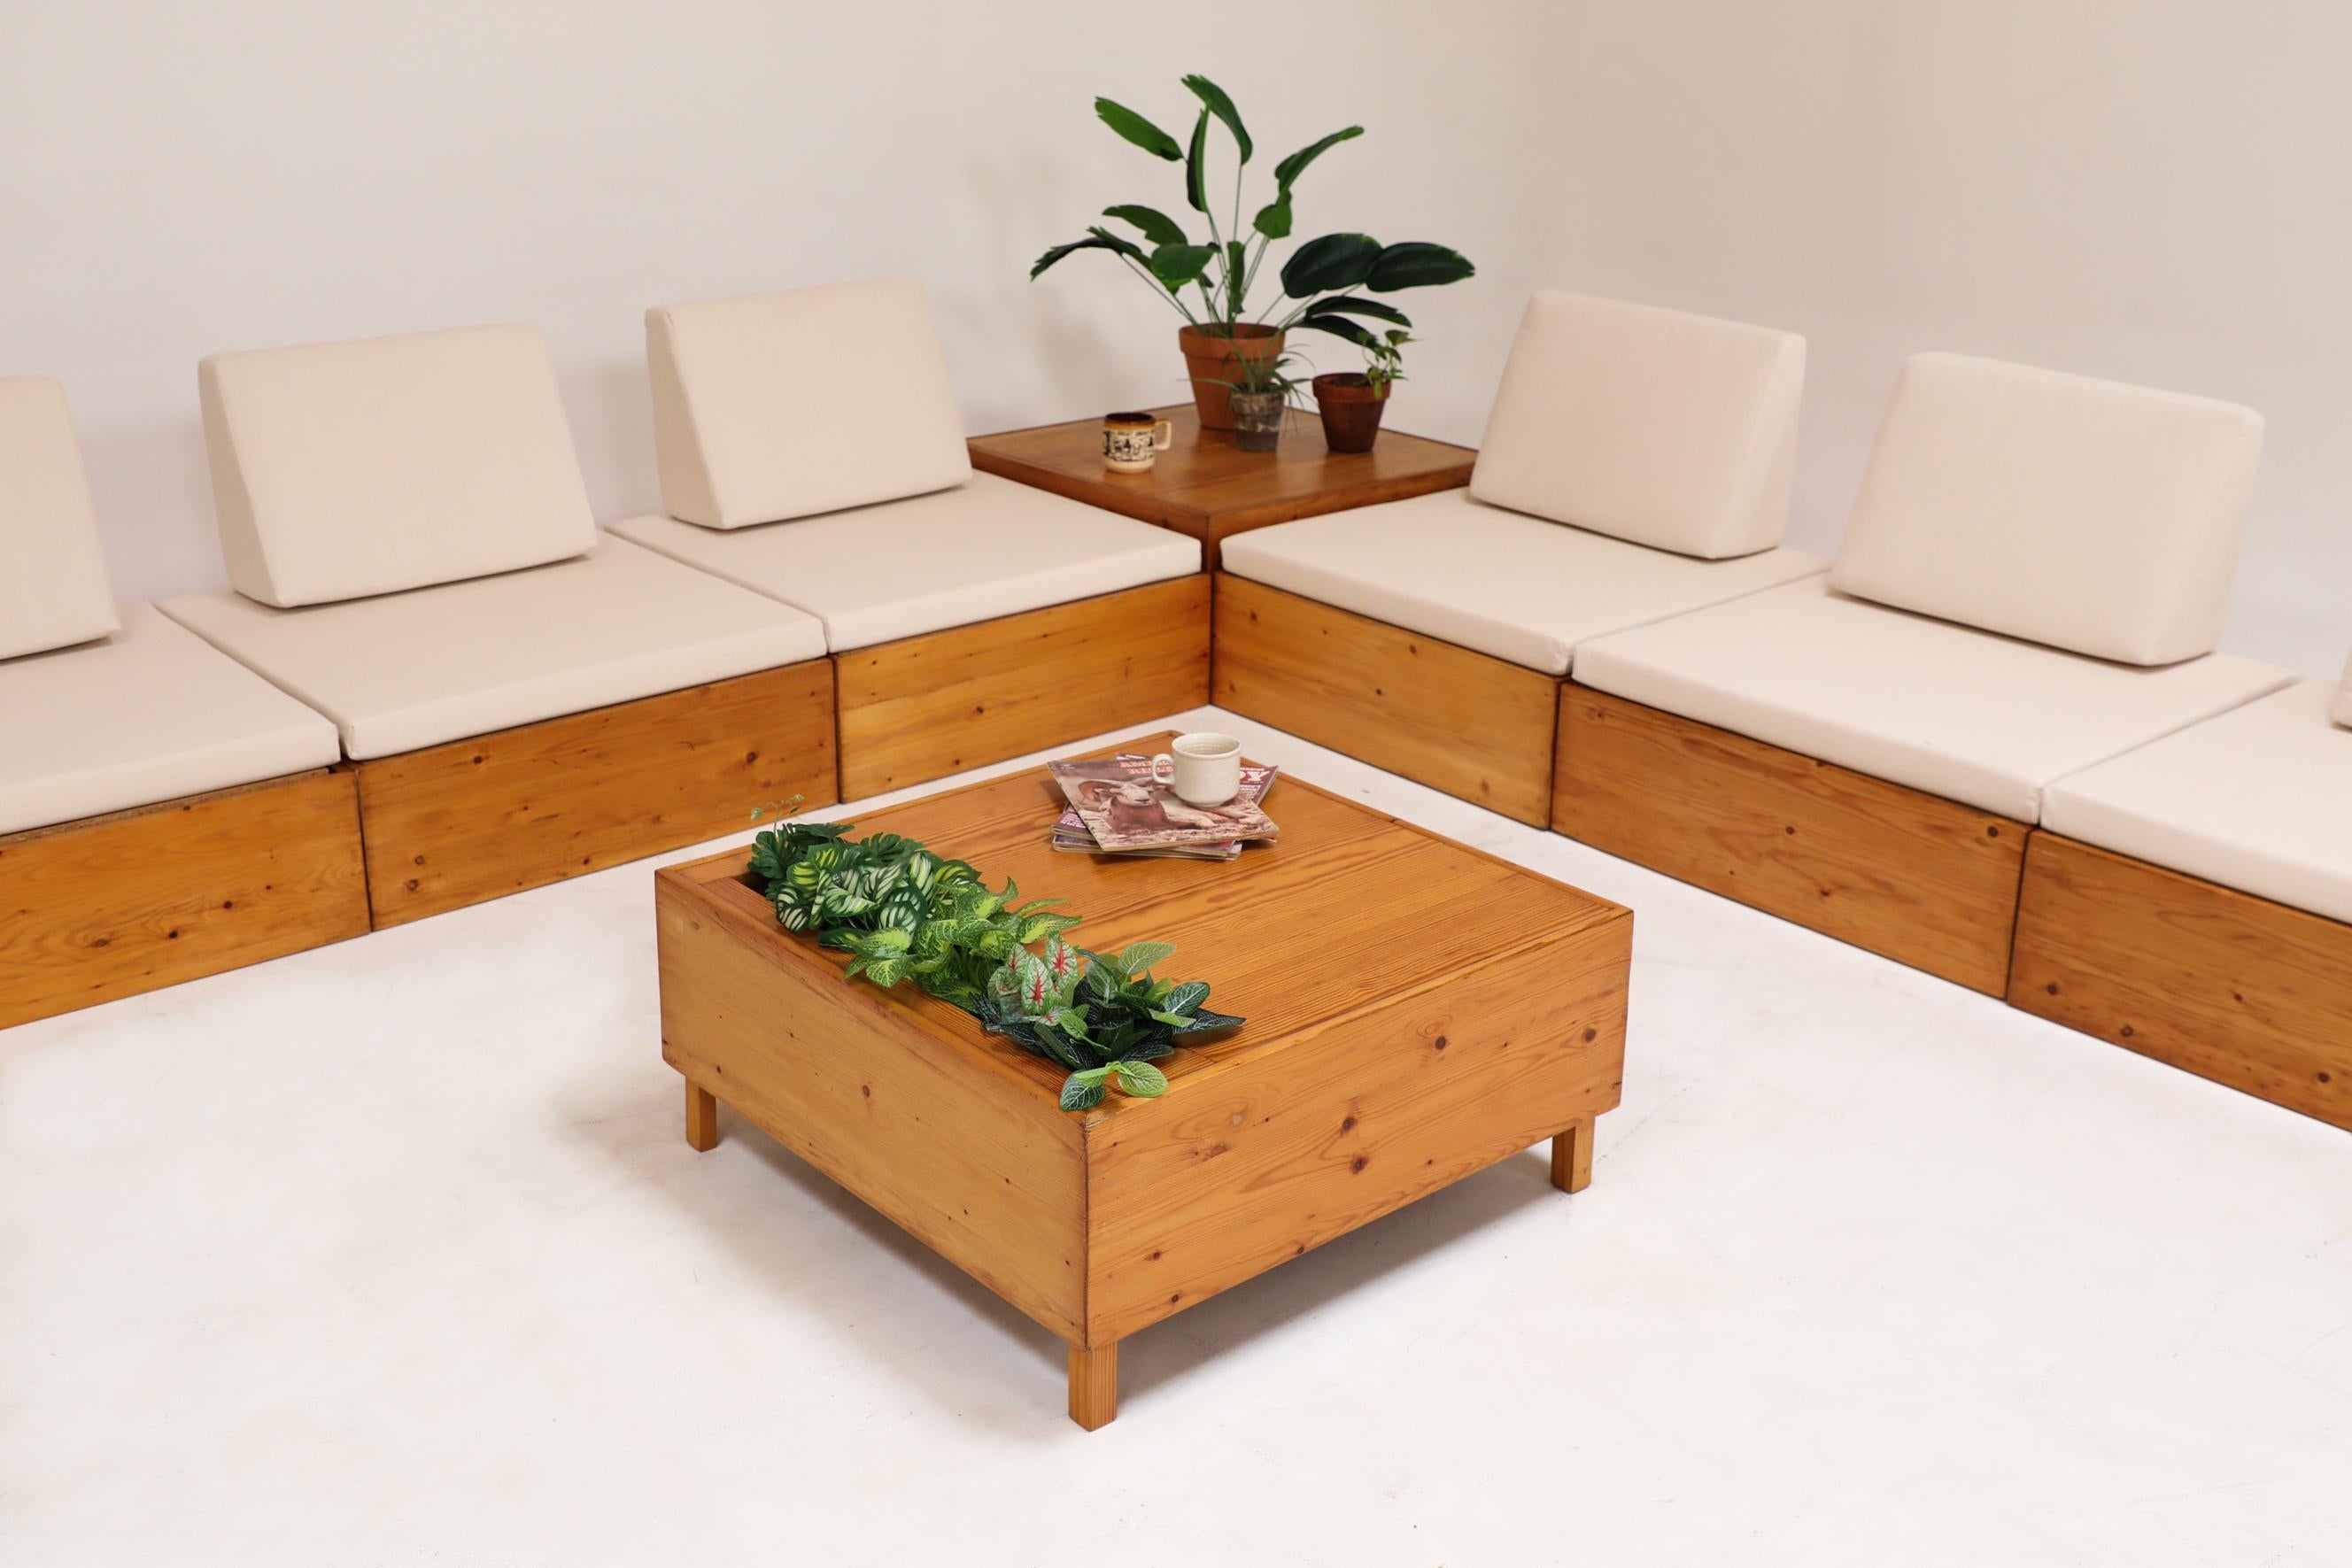 Ate van Apeldoorn Inspired Pine Sectional Sofa Suite with New Canvas Seating and Built-in Side tables. One has a cut-out for magazines or plants. Lightly refinished with all new cushions, in otherwise original condition. Each section is 30 3/4